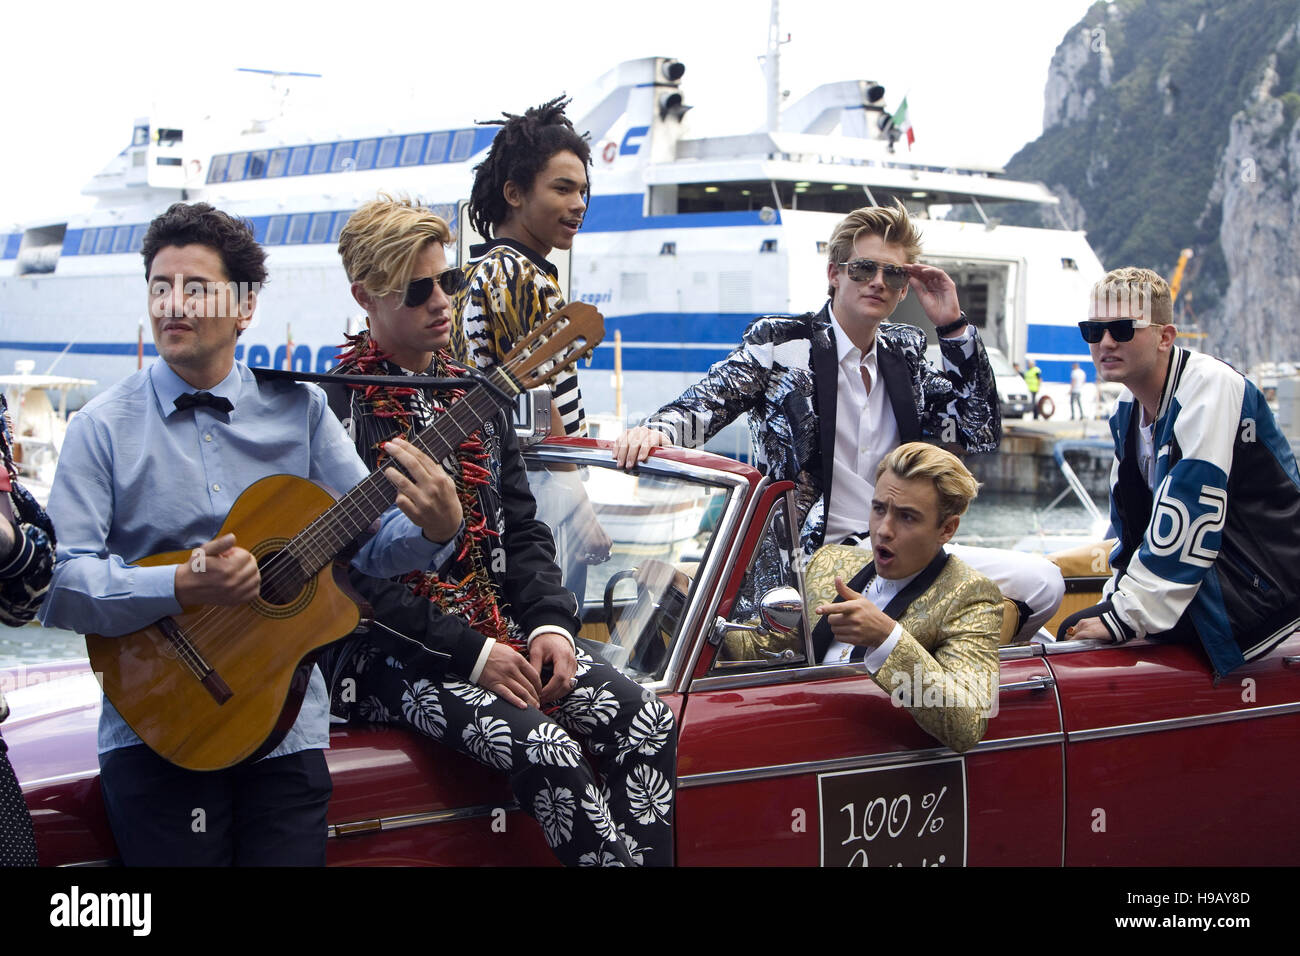 Dolce & Gabbana shoot their next advertising campaign in Capri  Featuring: Cameron Dallas, Luka Sabbat, Presley Gerber, Brandon Thomas Lee Where: Capri, Italy When: 20 Oct 2016 Credit: IPA/WENN.com  **Only available for publication in UK, USA, Germany, Au Stock Photo